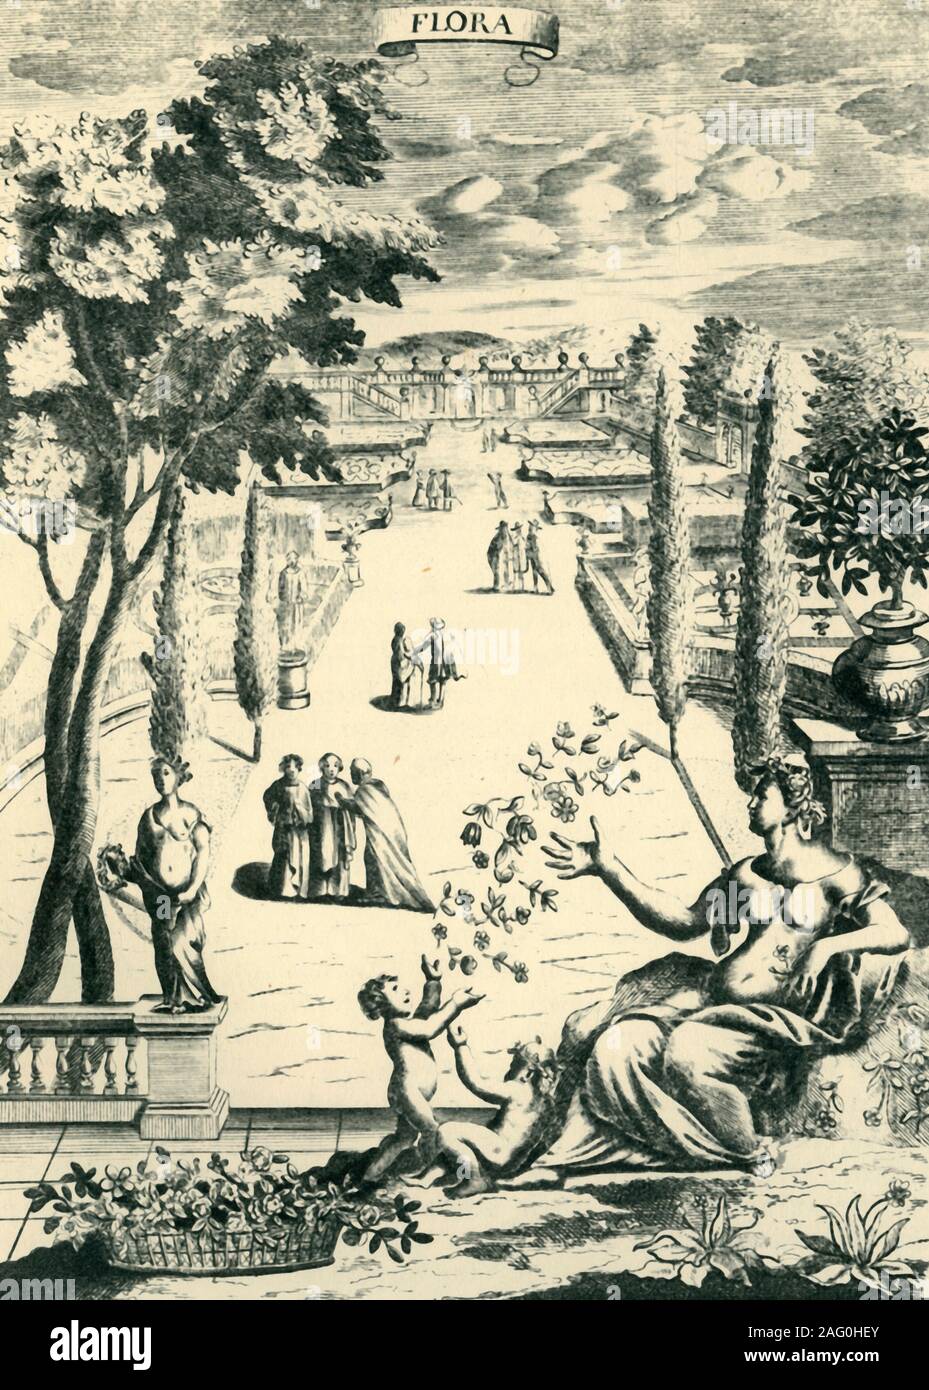 'Flora', 1686, (1944). View of a formal garden with a central walk lined with cypress trees. In the foreground the goddess Flora, goddess of flowers and of the season of spring, throws petals for two cherubs. From &quot;The Gentleman's Recreations&quot; by Richard Blome. Published in &quot;English Gardens&quot;, by Harry Roberts. [Collins, London, 1944] Stock Photo